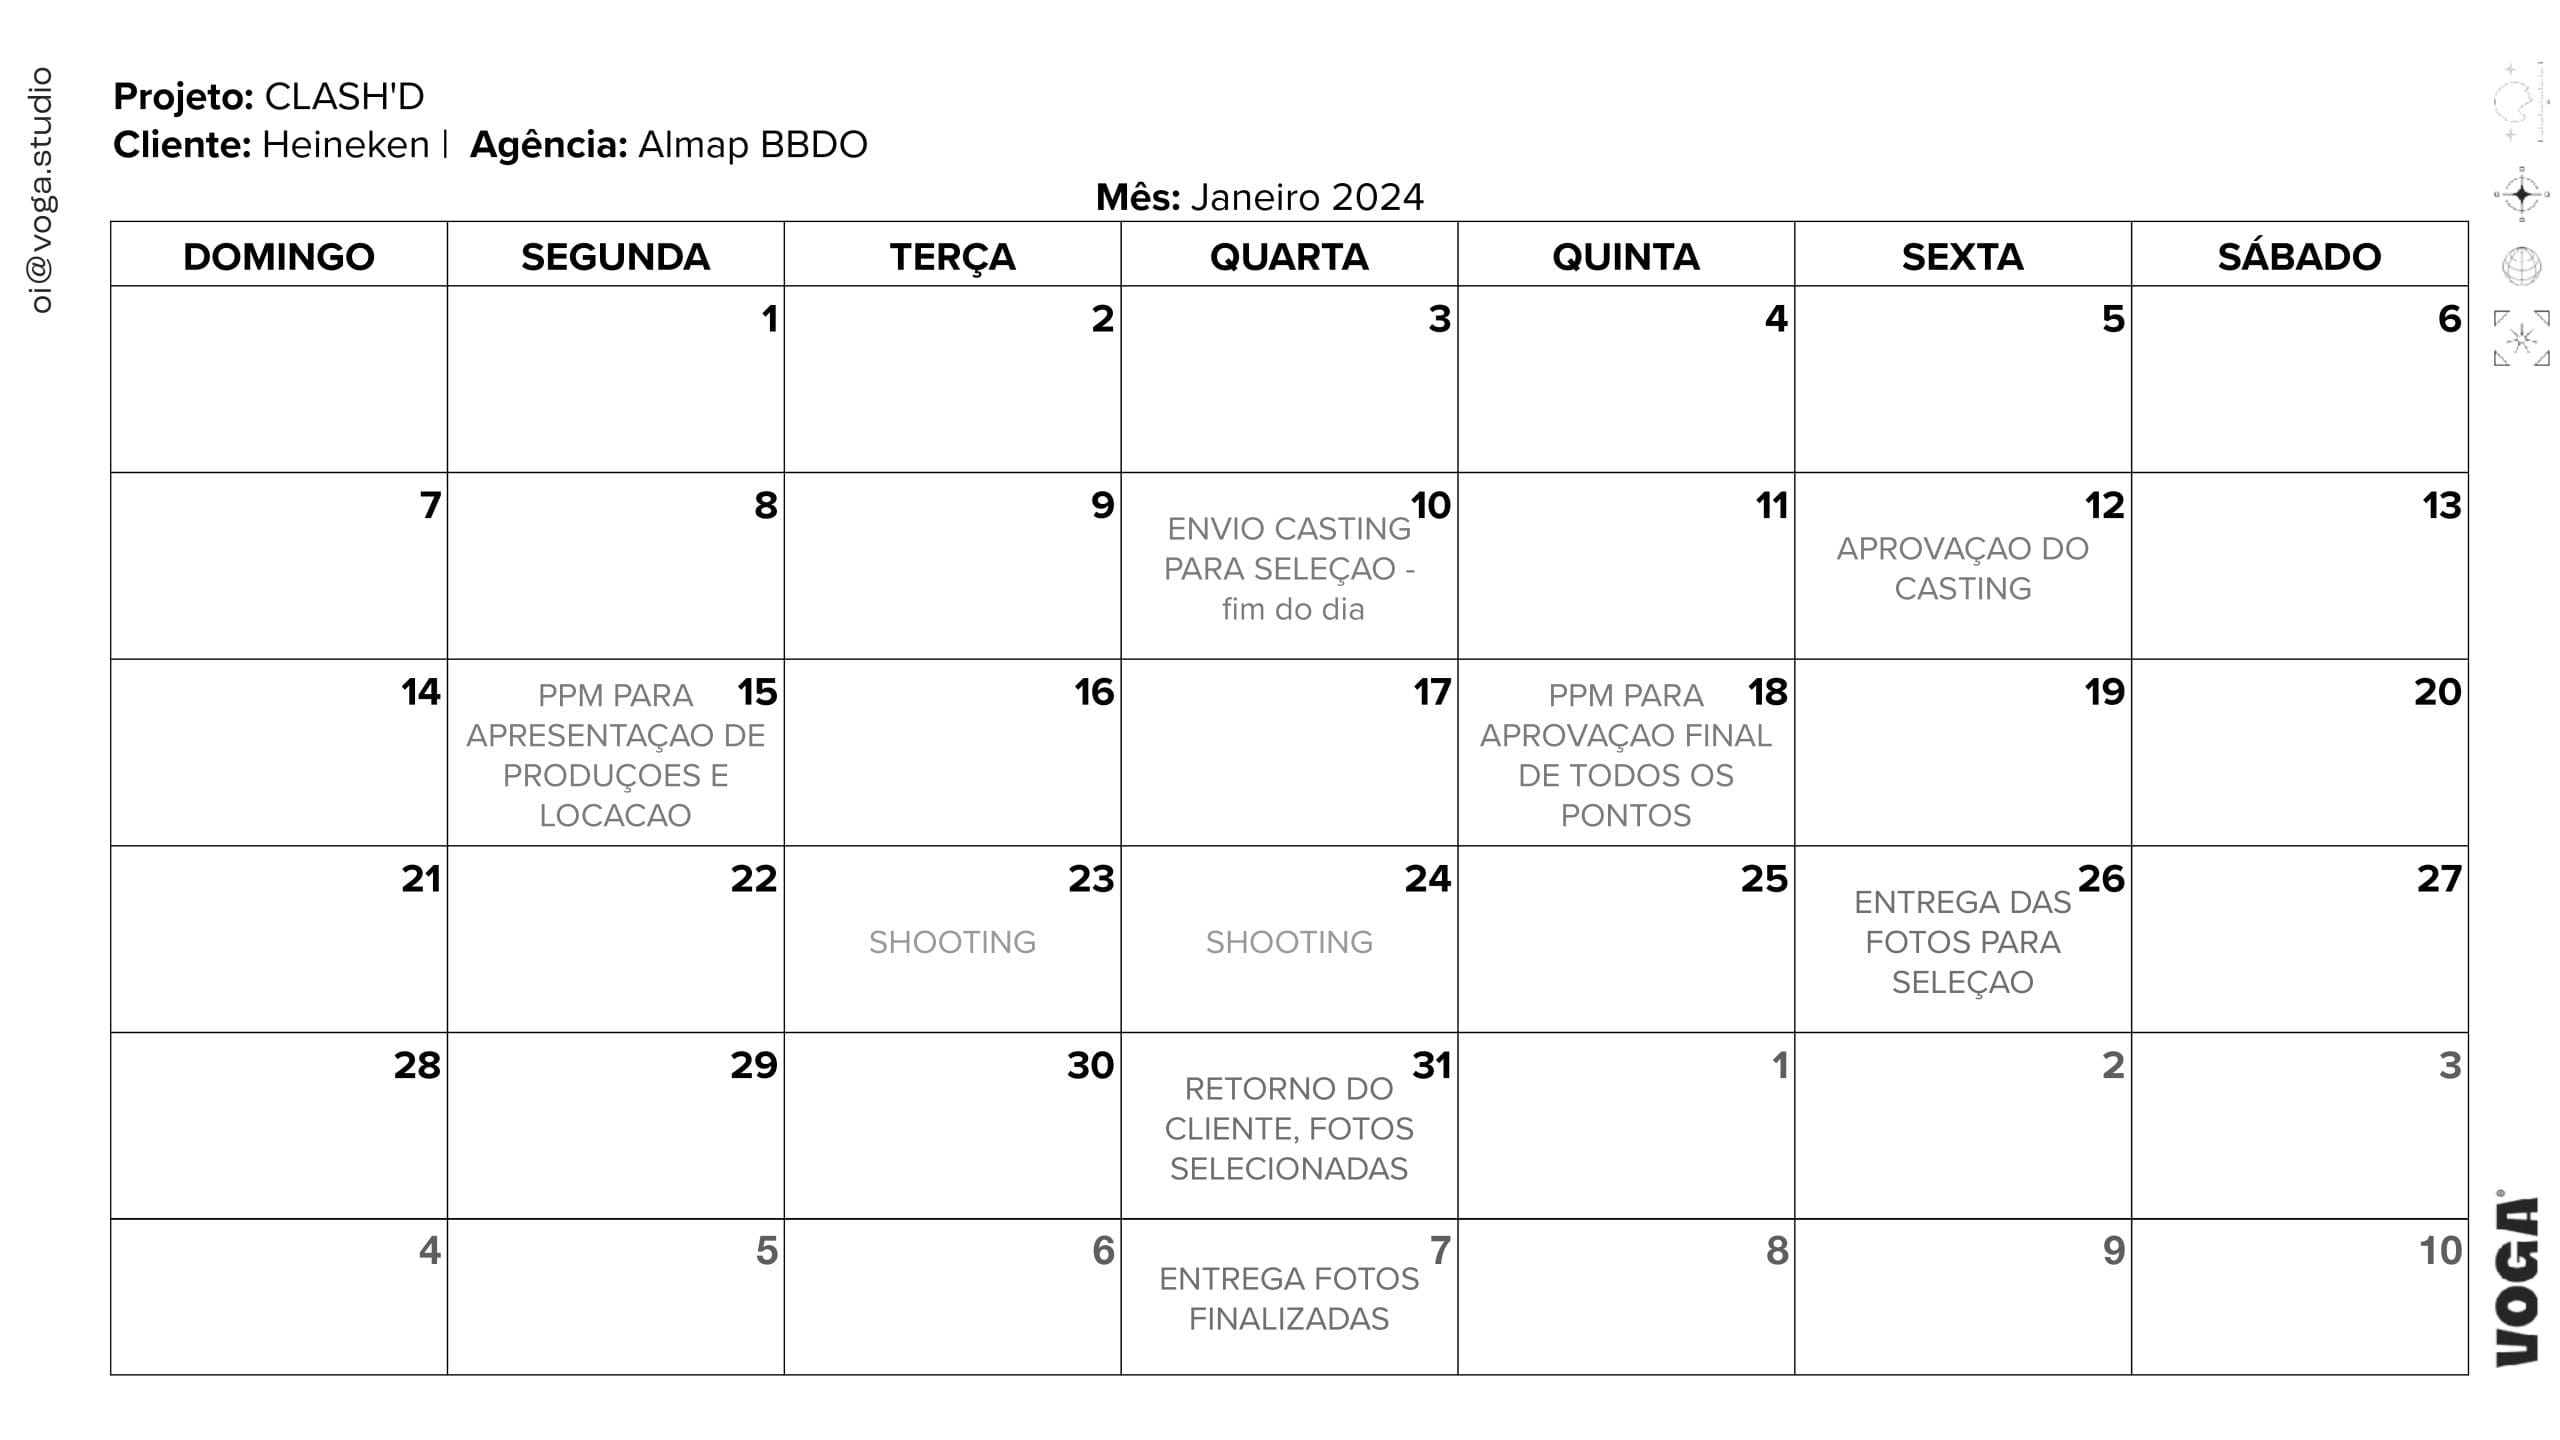 A calendar for the month of january 2020.